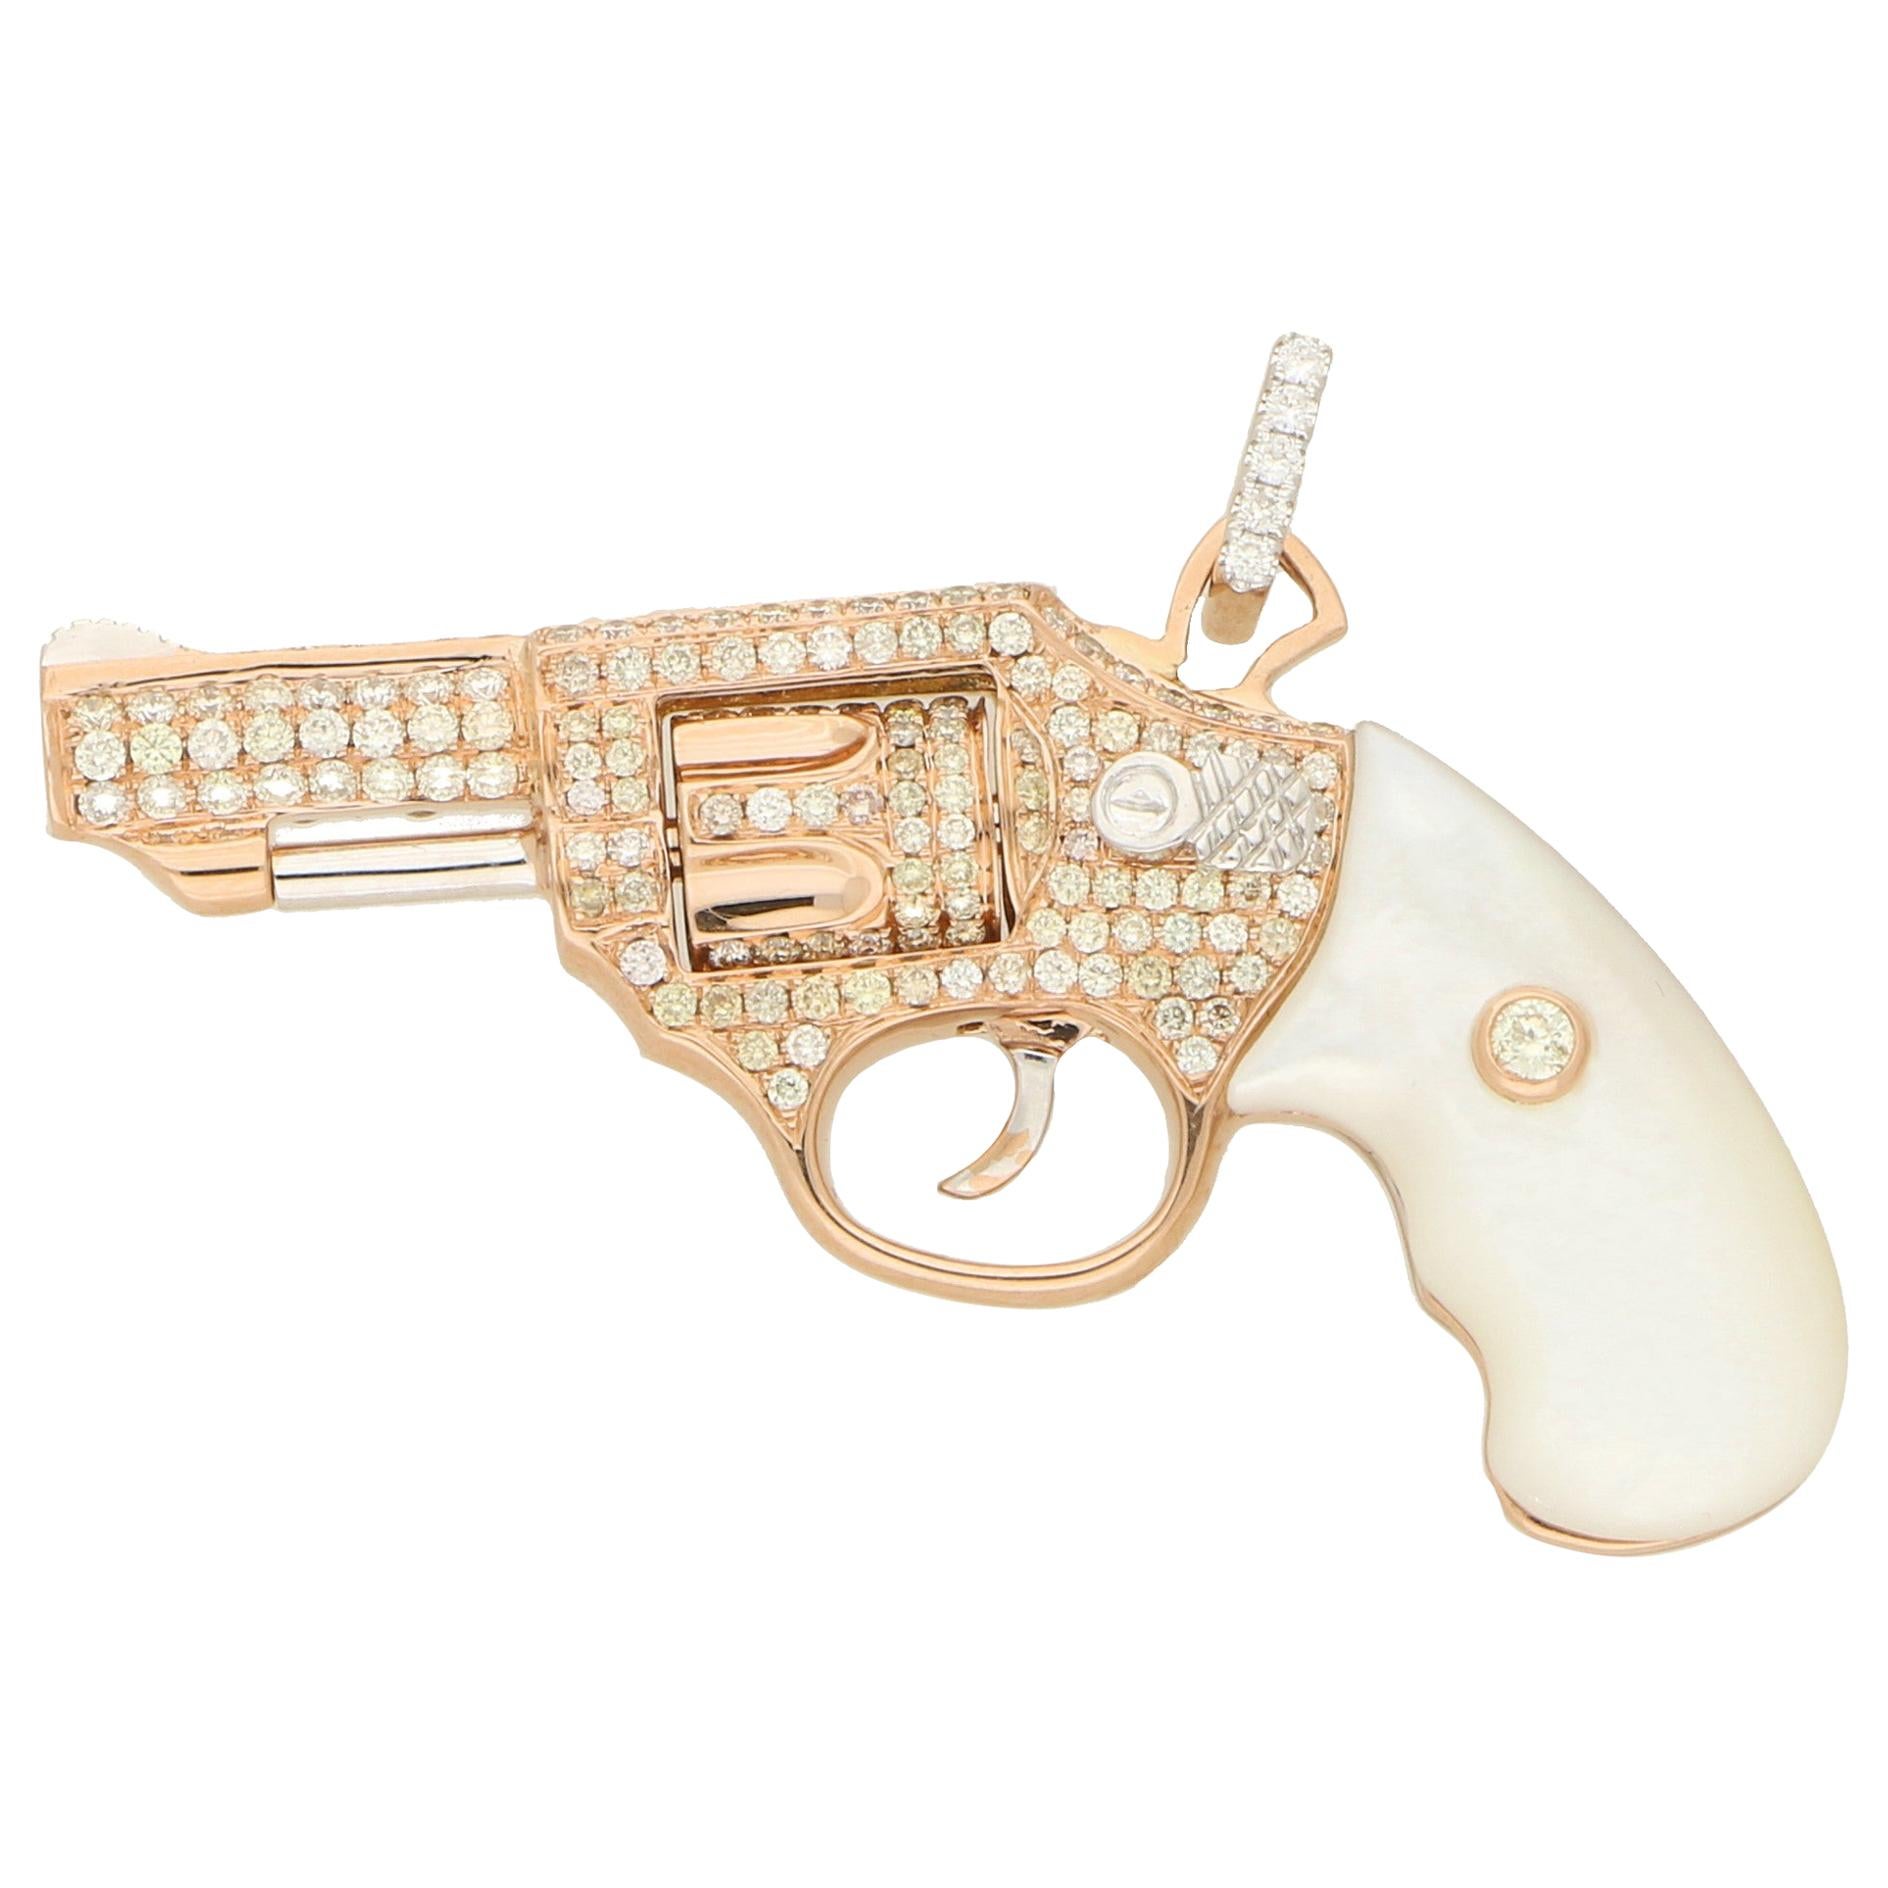 Diamond and Mother of Pearl Jeweled Gun Pendant in Rose Gold